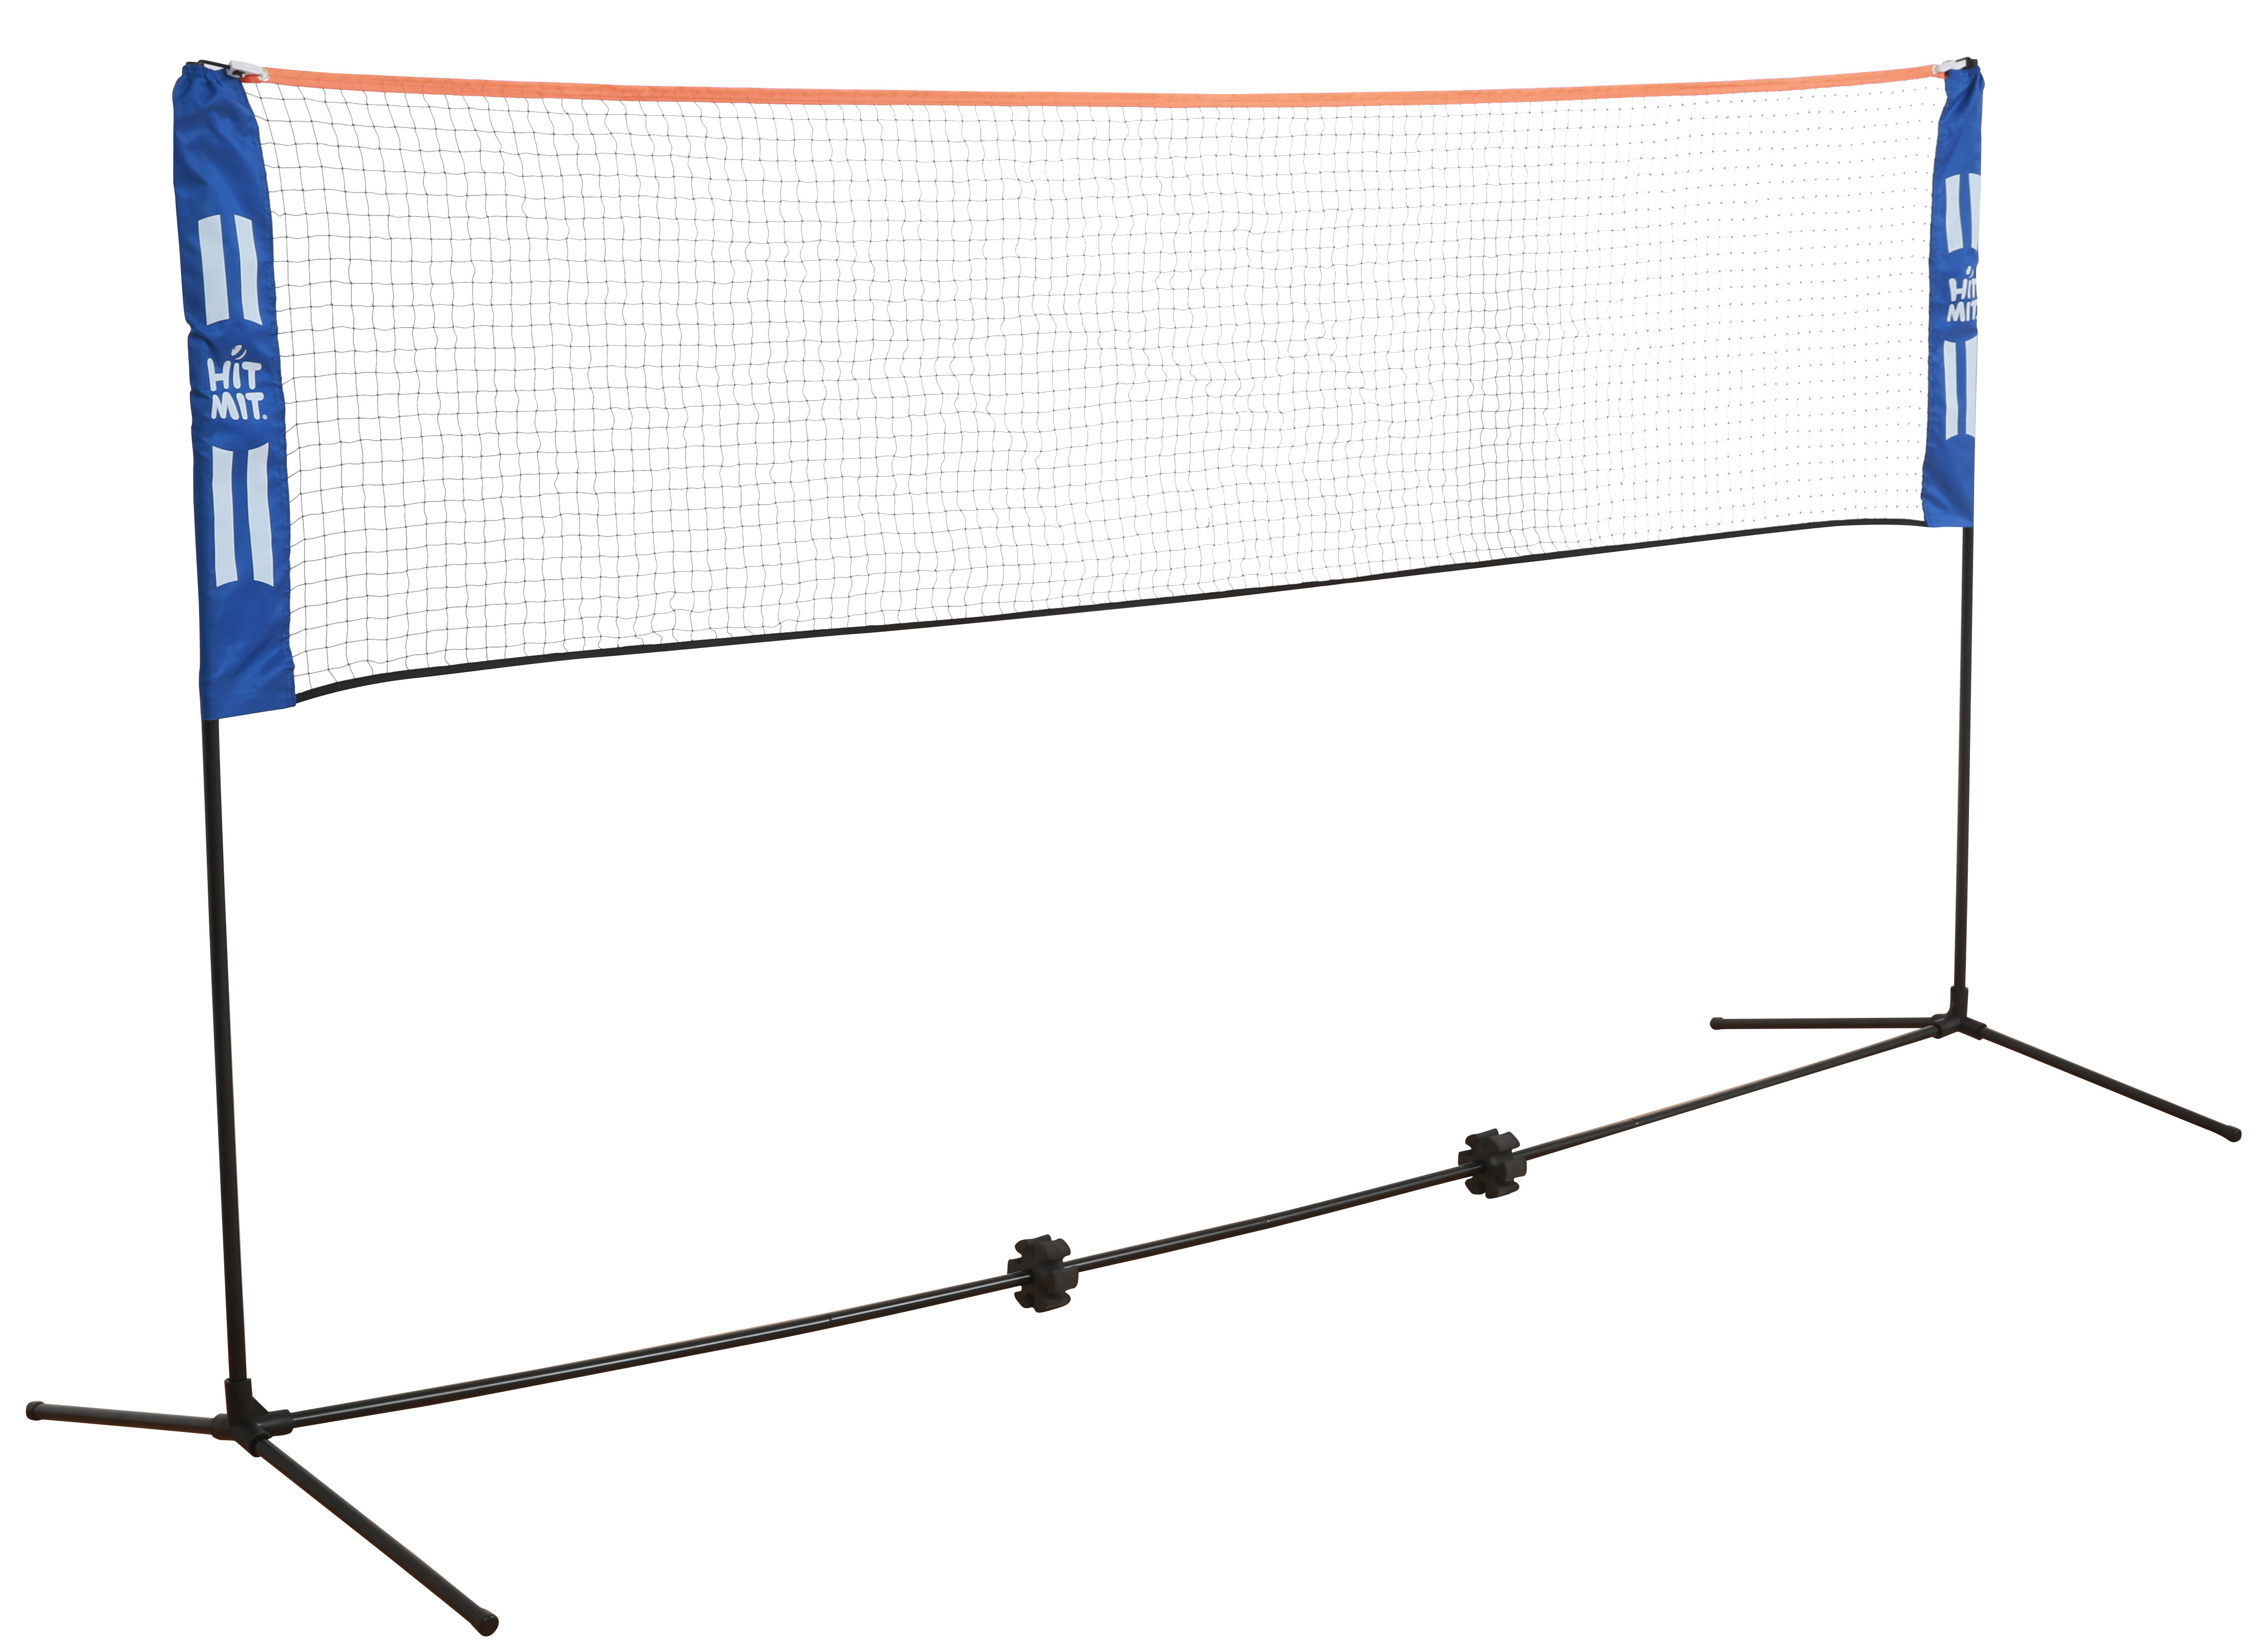  GSE Badminton Sets with Net, Portable Complete Badminton Sets  for backyards with net with 4 Rackets,Portable Badminton Net,3 Birdies :  Sports & Outdoors